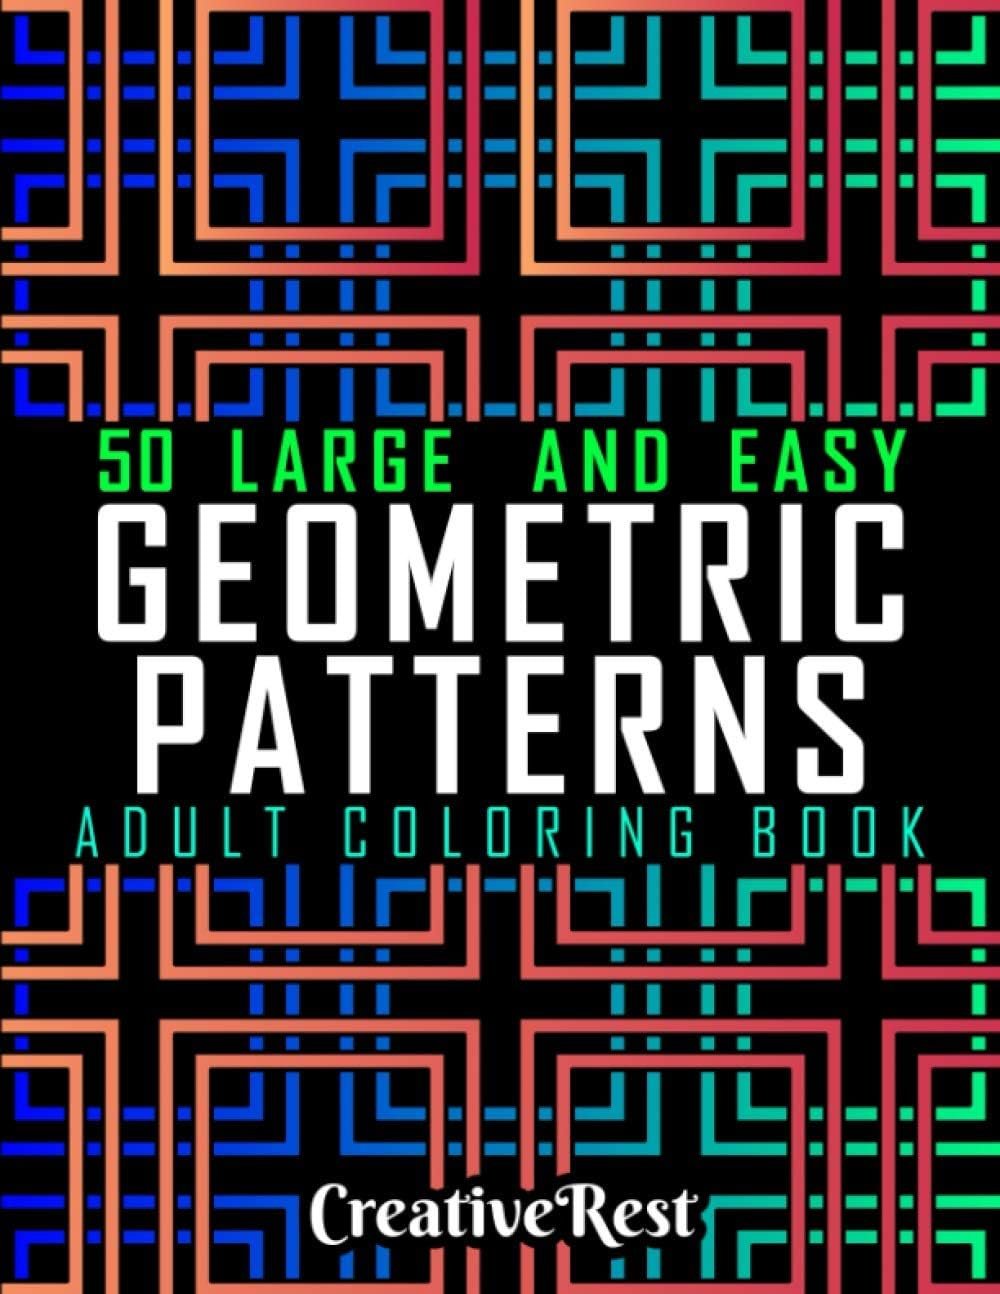 Easy Geometric Patterns Adult Coloring Book 50 Large and Simple